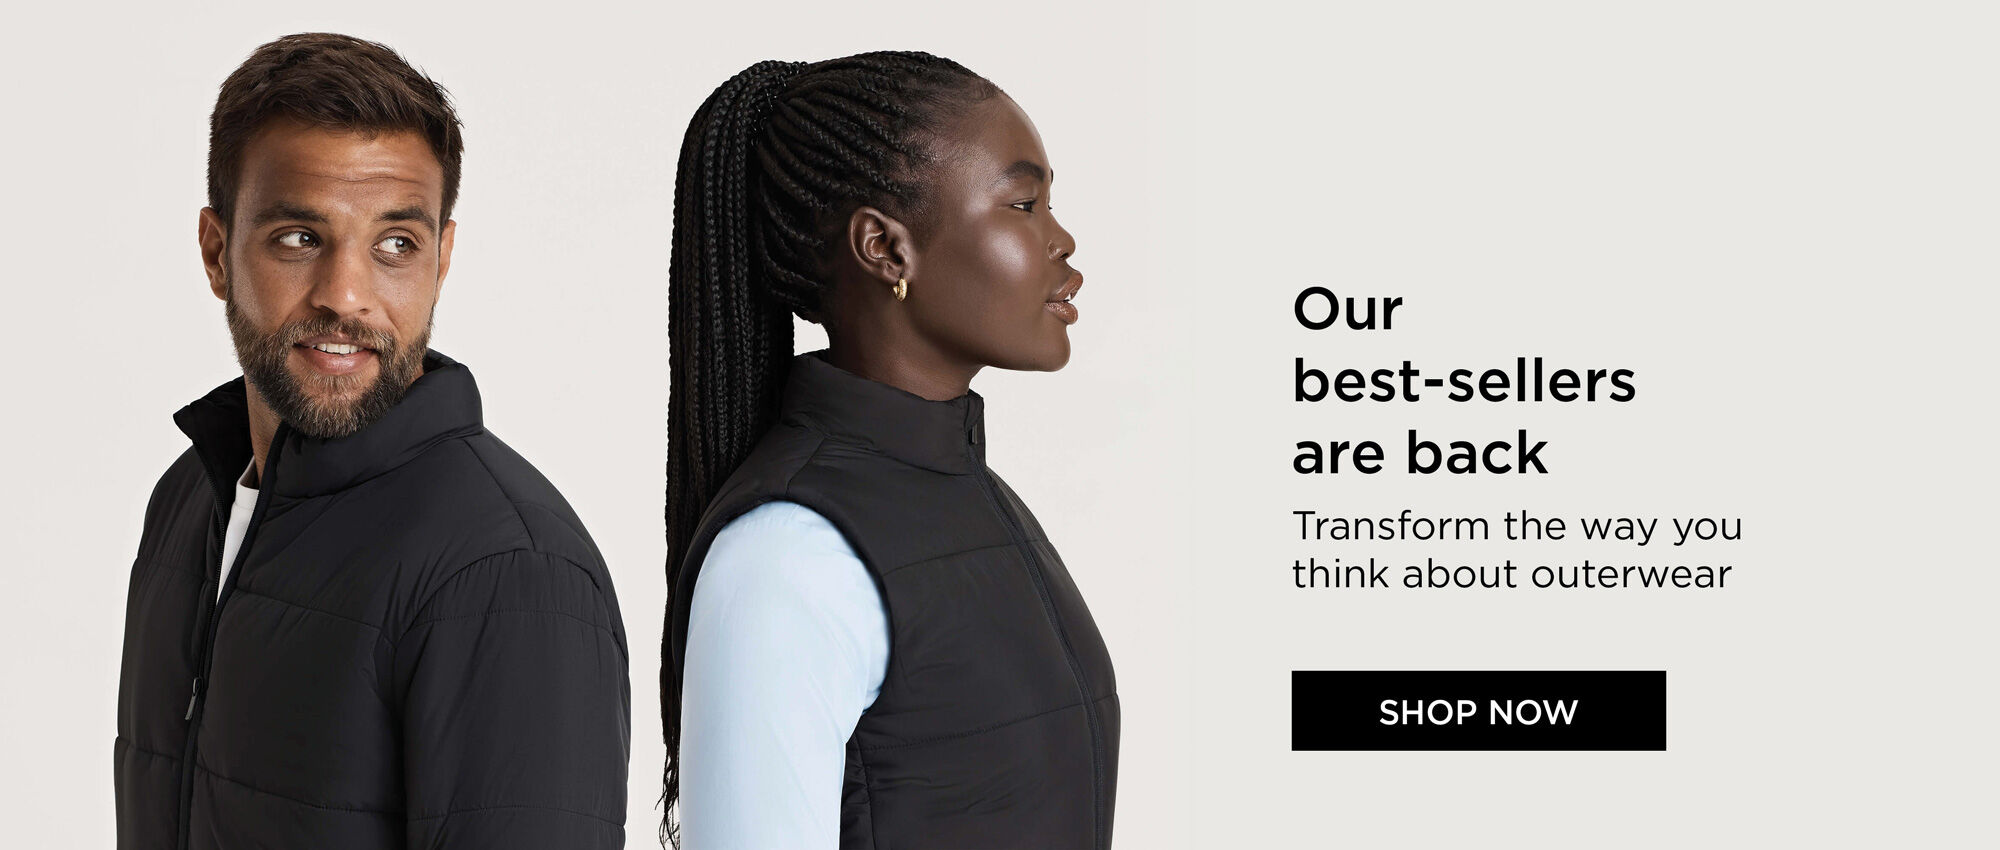 Our best-sellers are back. Transform the way you think about outerwear